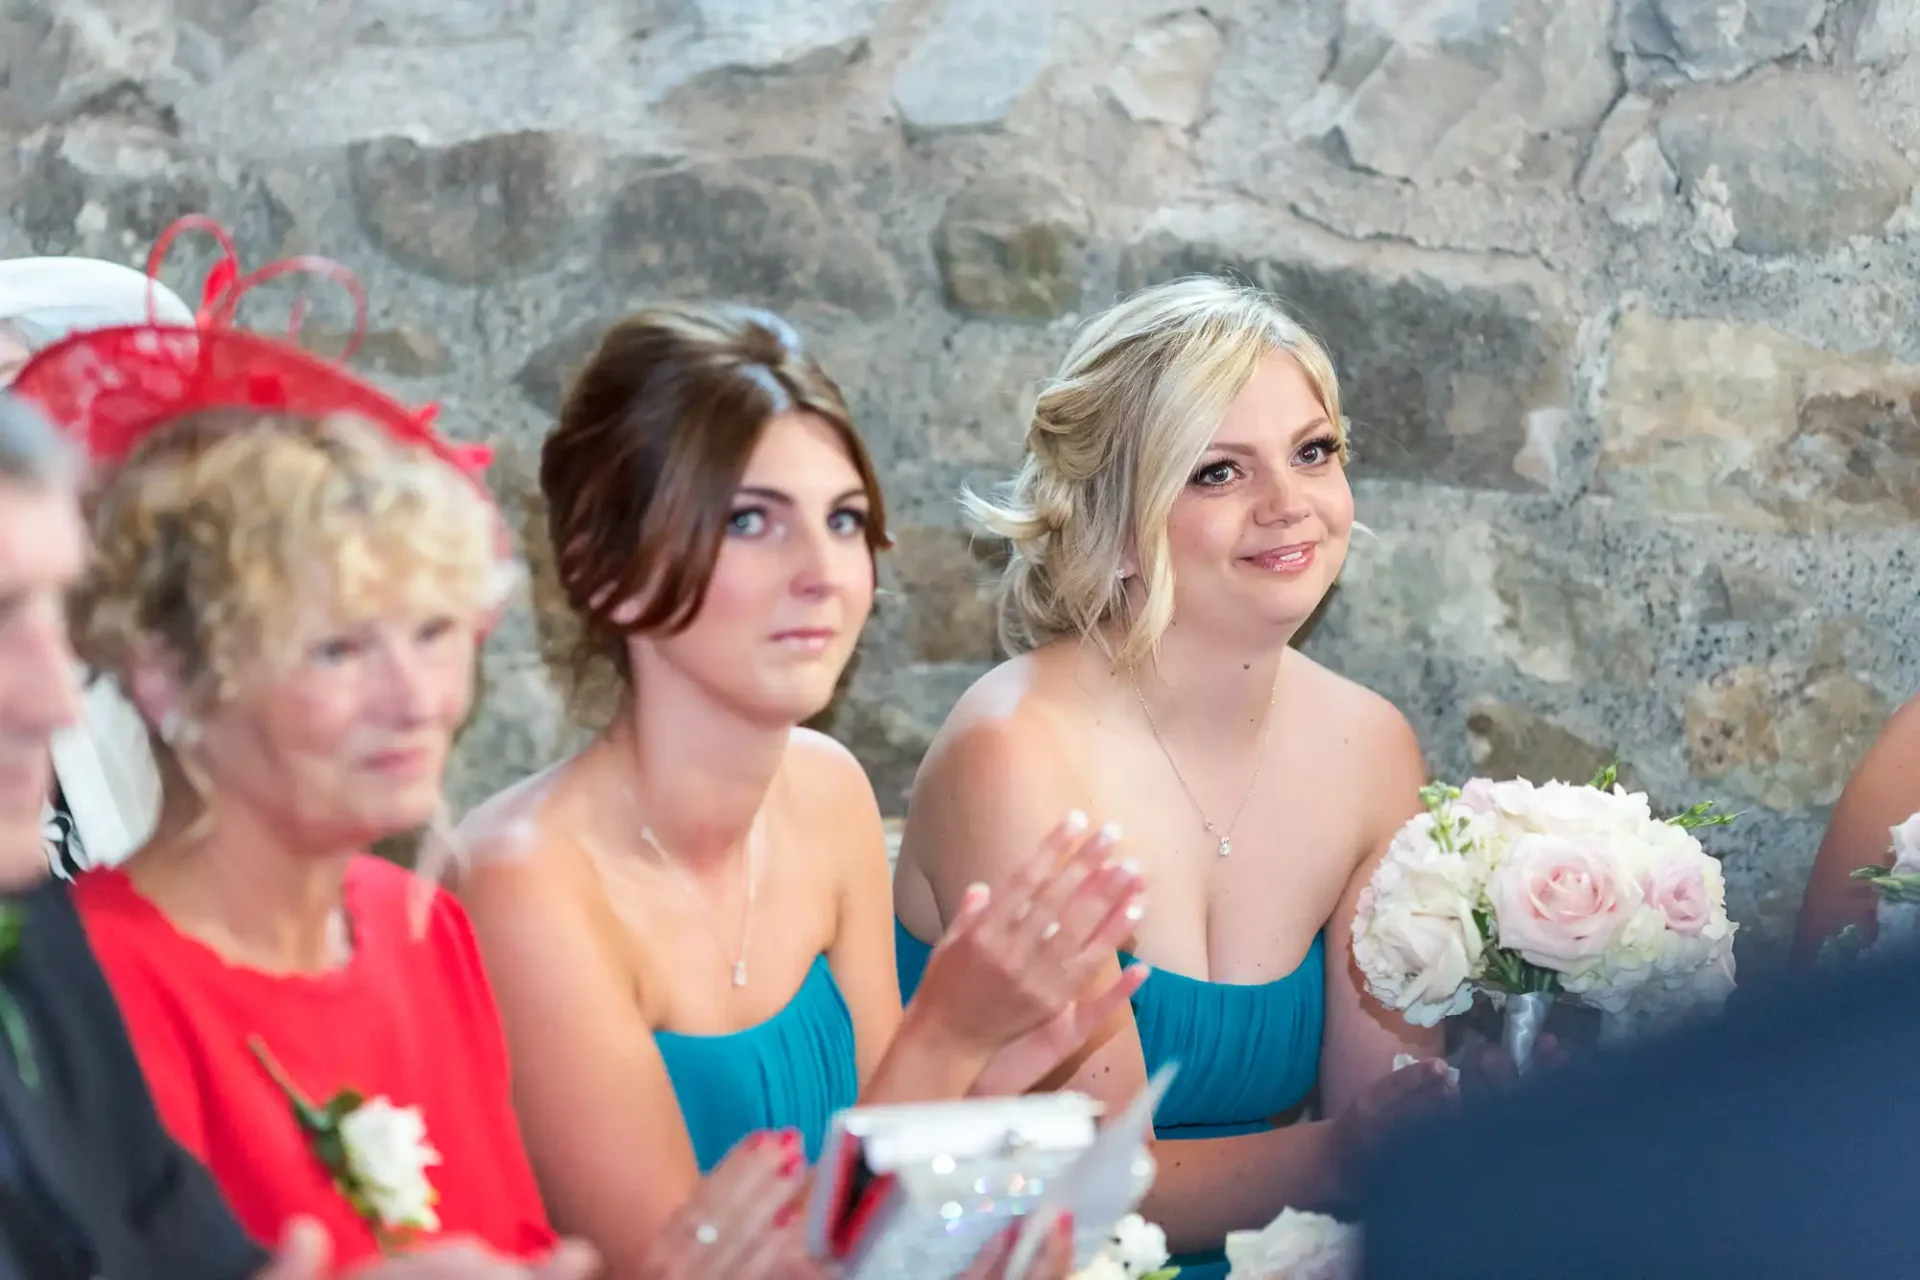 Three women at a wedding ceremony, wearing elegant dresses and sitting by a table adorned with flowers, clapping and looking attentively towards the front.